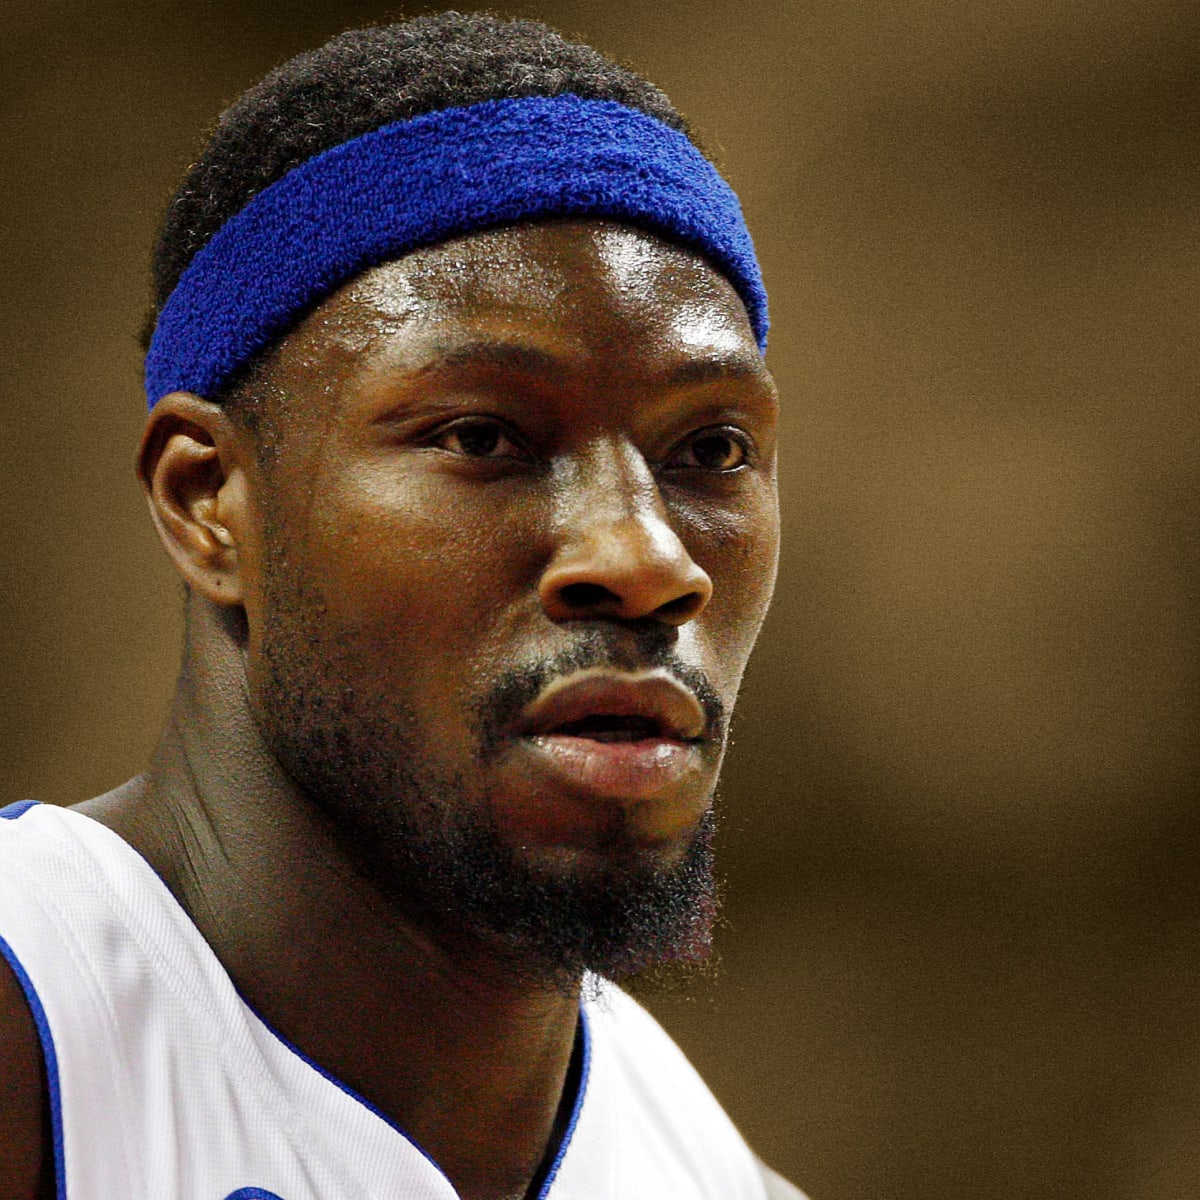 RIP to the GOAT', Ben Wallace responds to Kobe Bryant's death